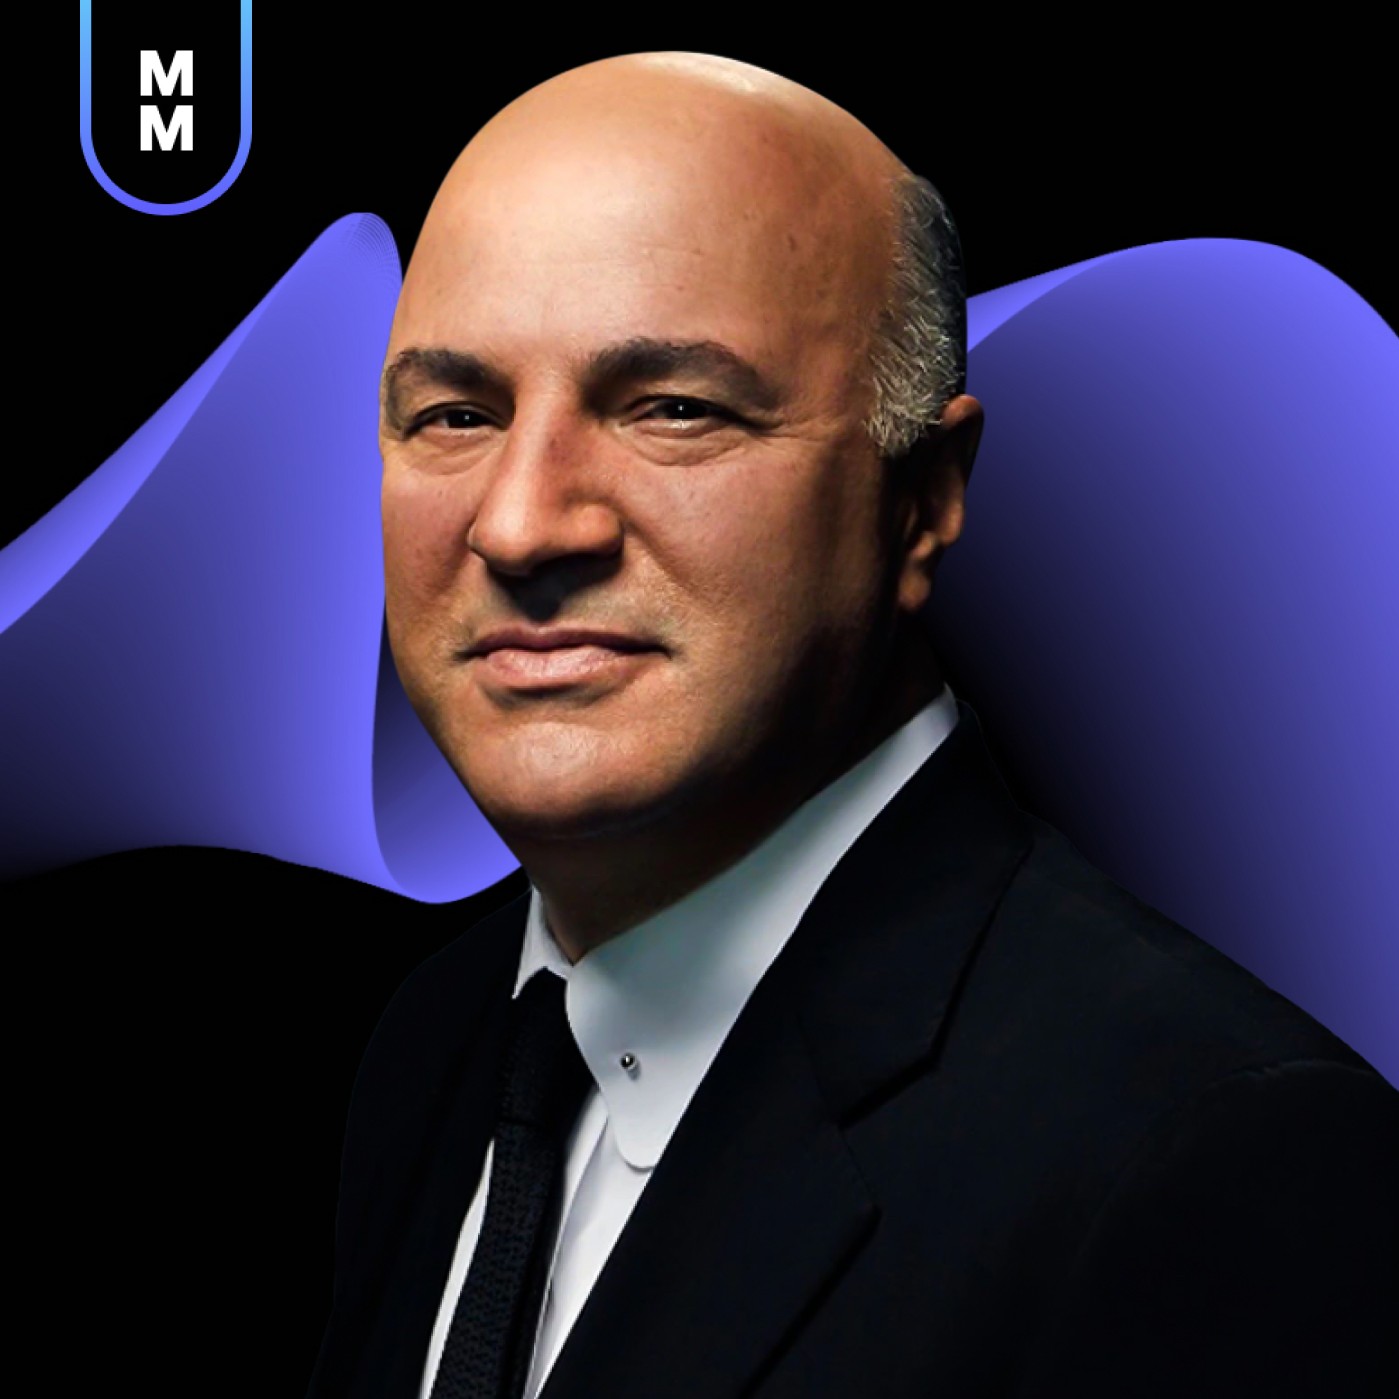 Ep 70 | The Evolution of Digital Finance: From Speculative Value to Utility Value with Kevin O’Leary